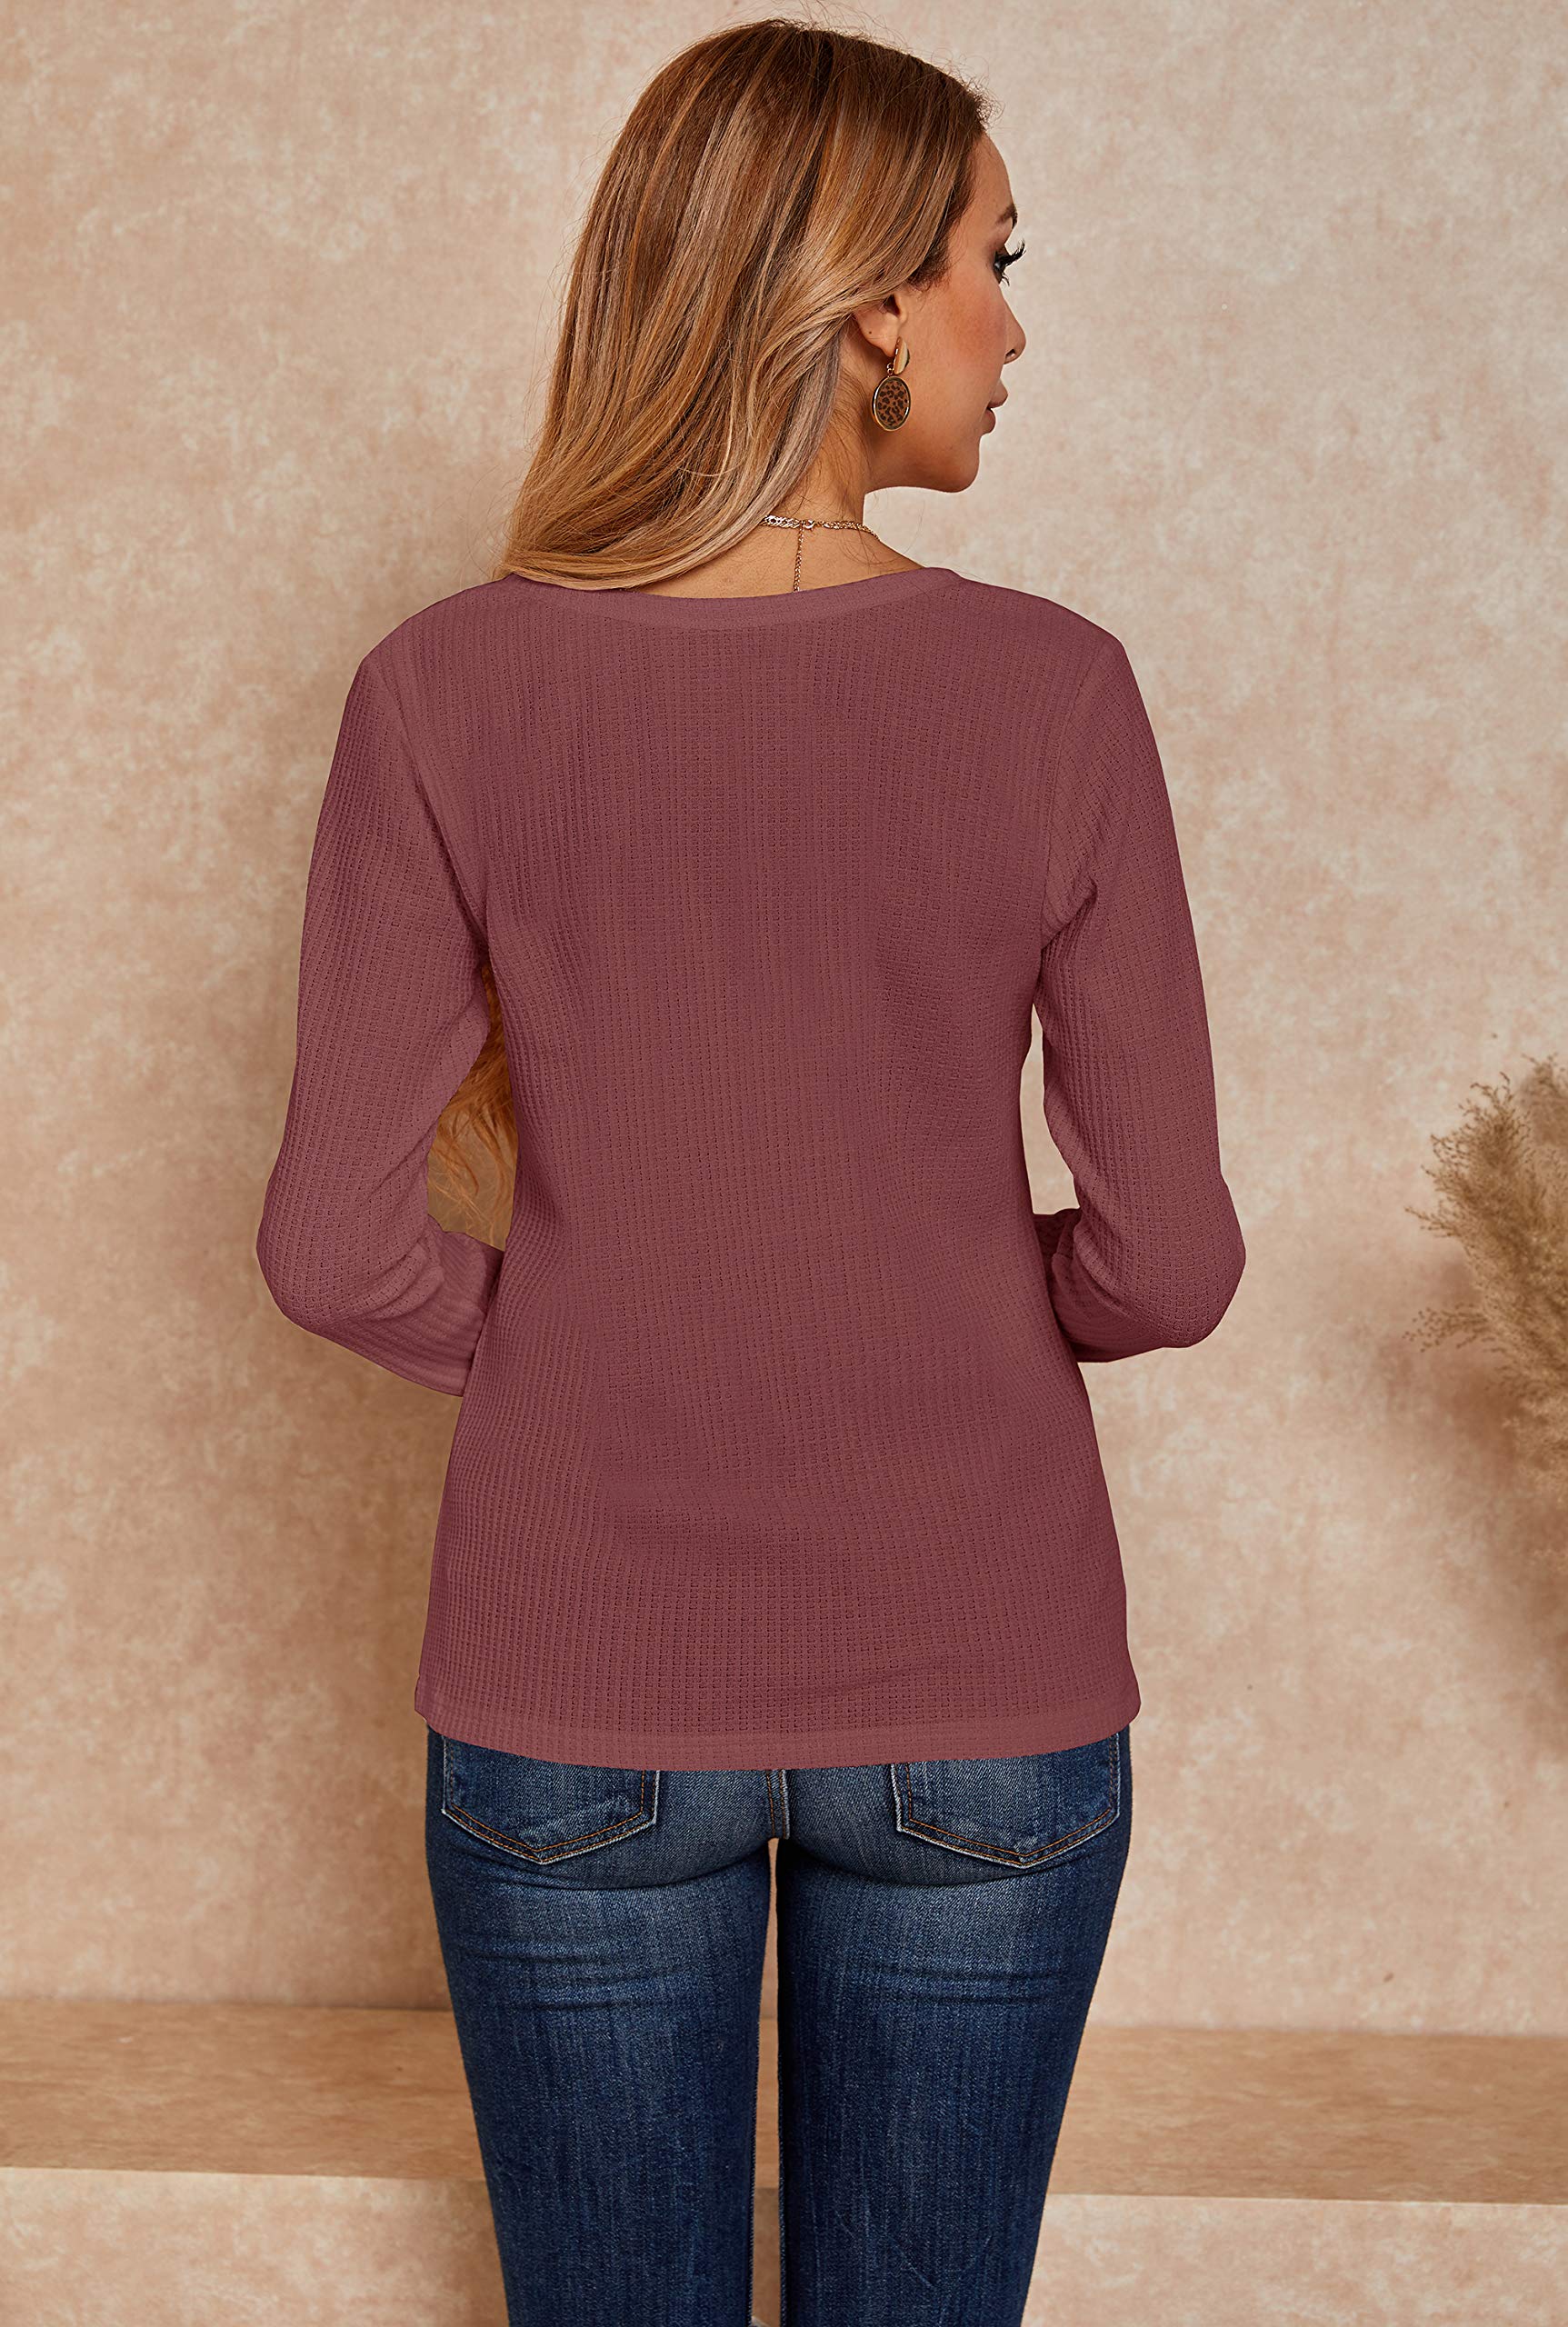 Womens V Neck Waffle Knit Shirts Long Sleeve Loose Fitting Warm Tee Tops Sweaters Pullovers